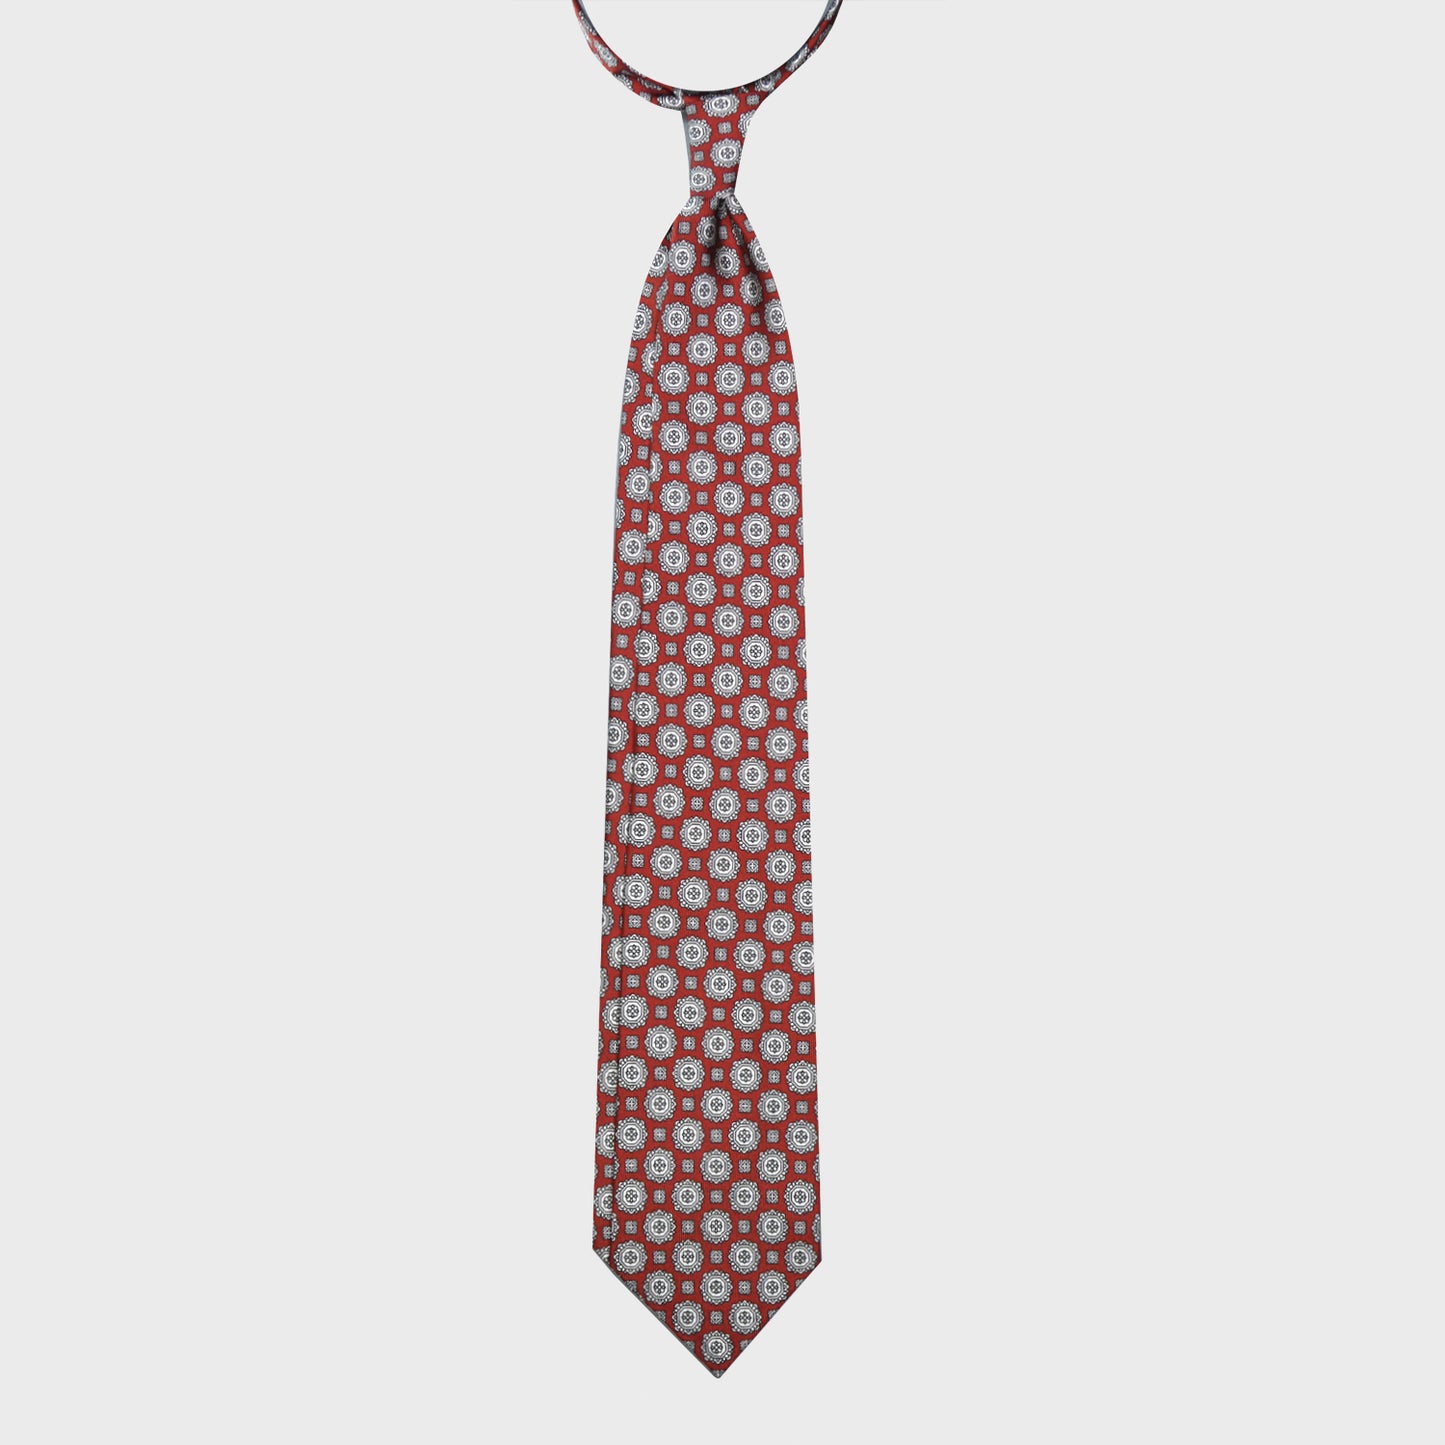 F.Marino Silk Tie 3 Folds Medallions Lobster Red-Wools Boutique Uomo